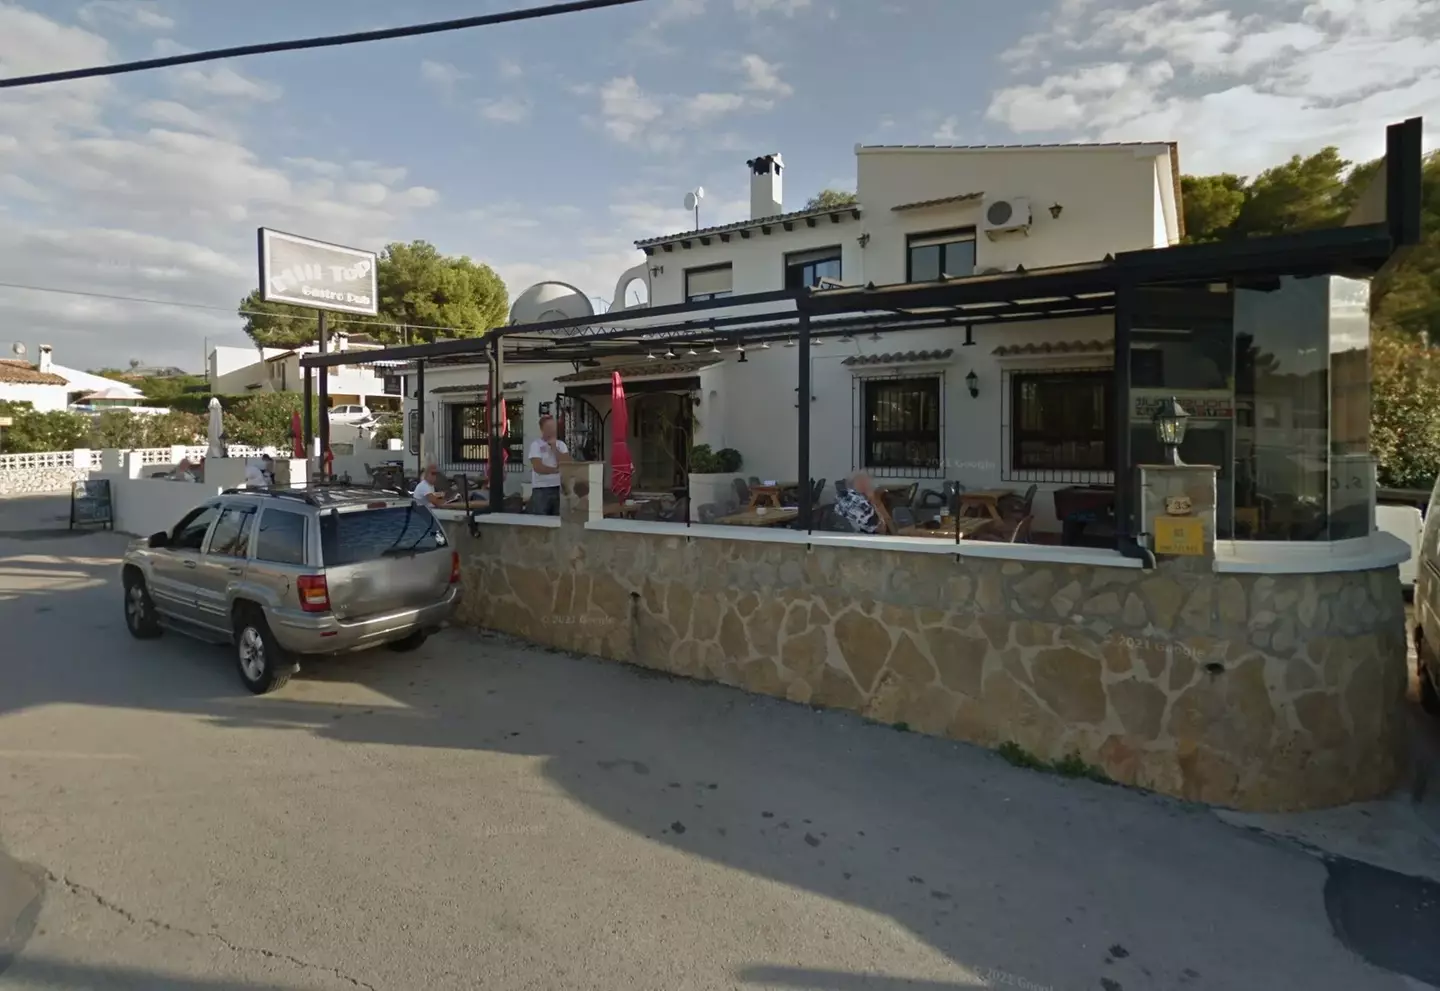 The 68-year-old was eating at the Hill Top pub in Moraira.